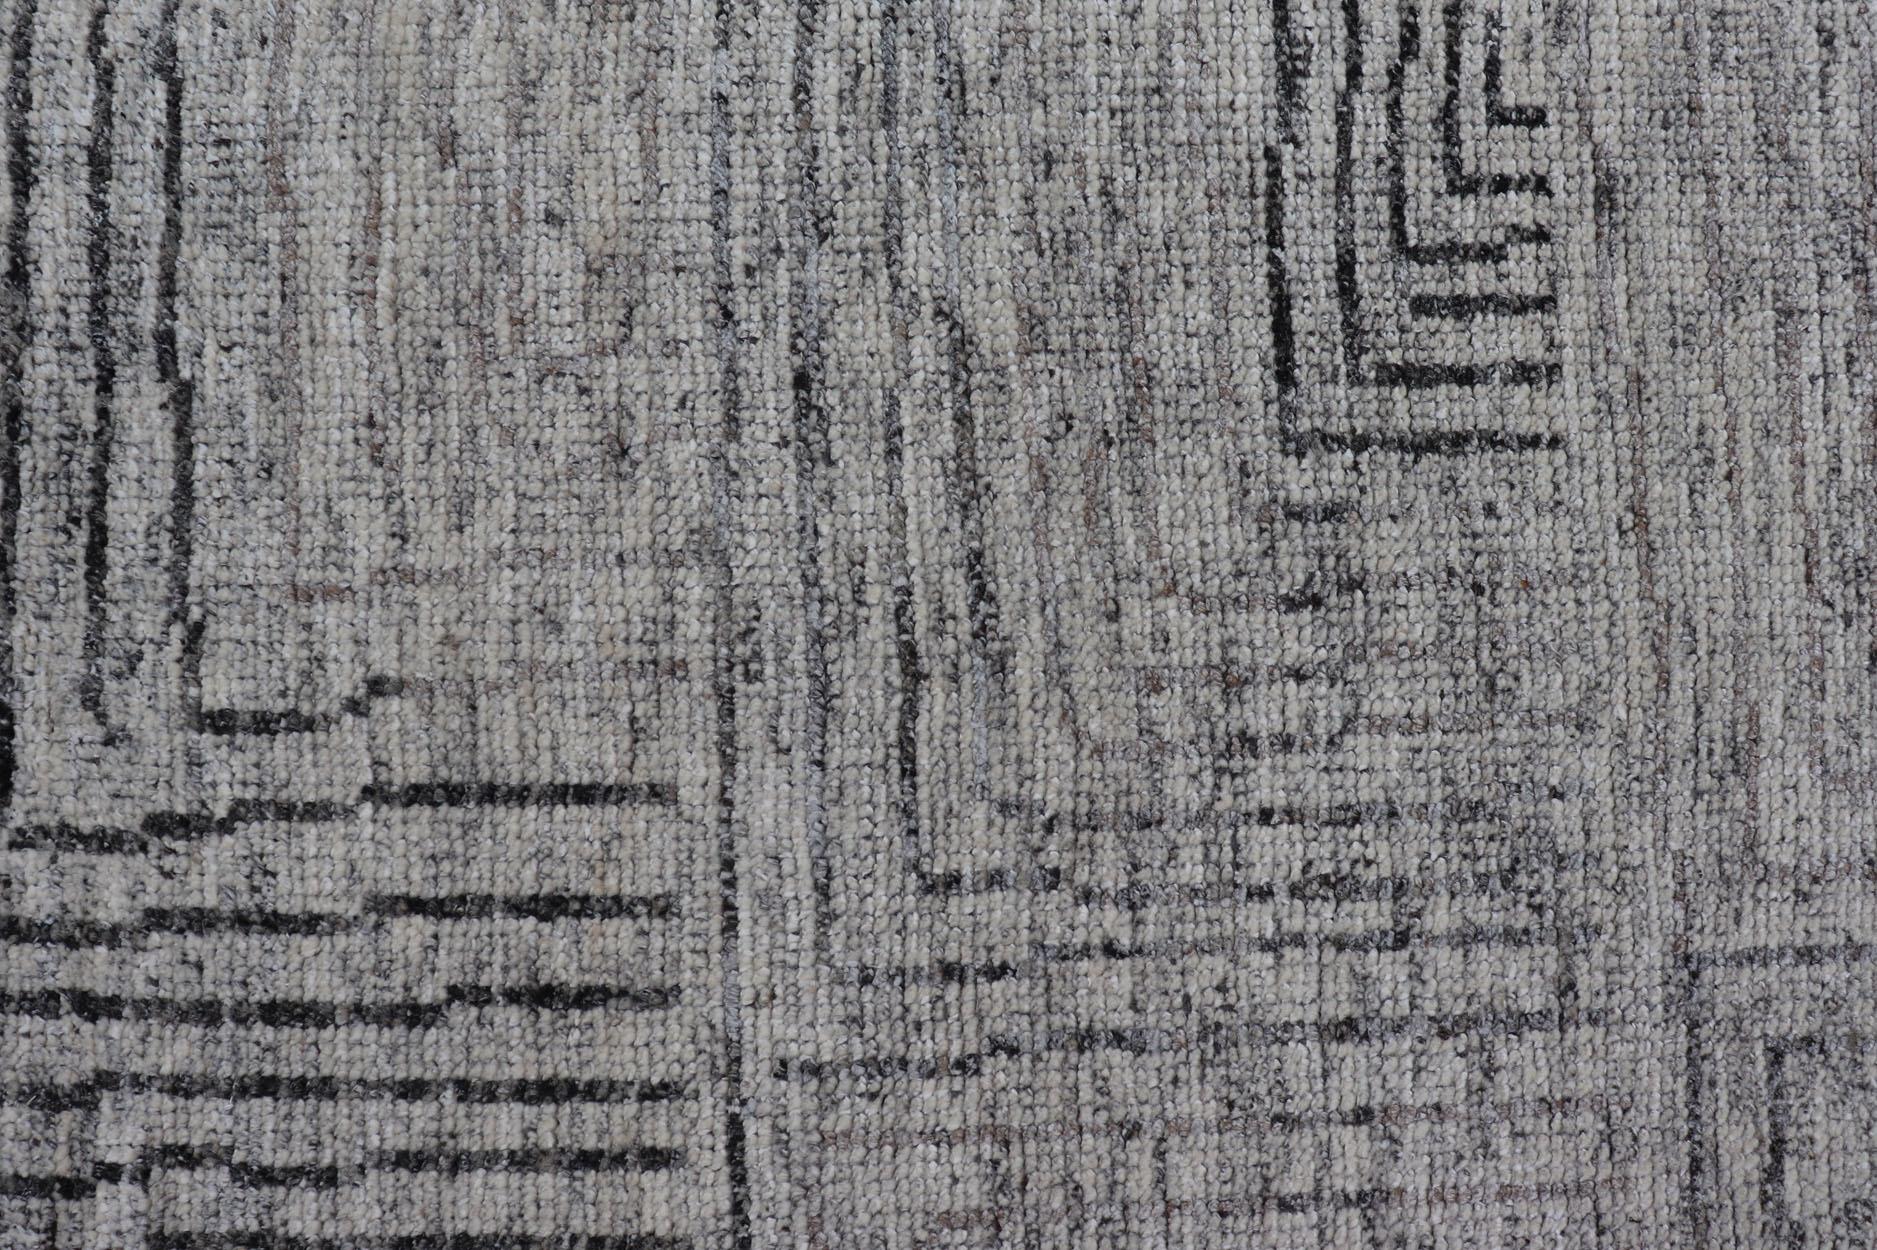 Measures 6 x 8'8 

This modern area rug features varying shades of gray in the field, blending neutrals into a near-homogenous color. The simple design vines all-over the field, rendered in a dark gray. 

Country of origin: India; Type: Modern,